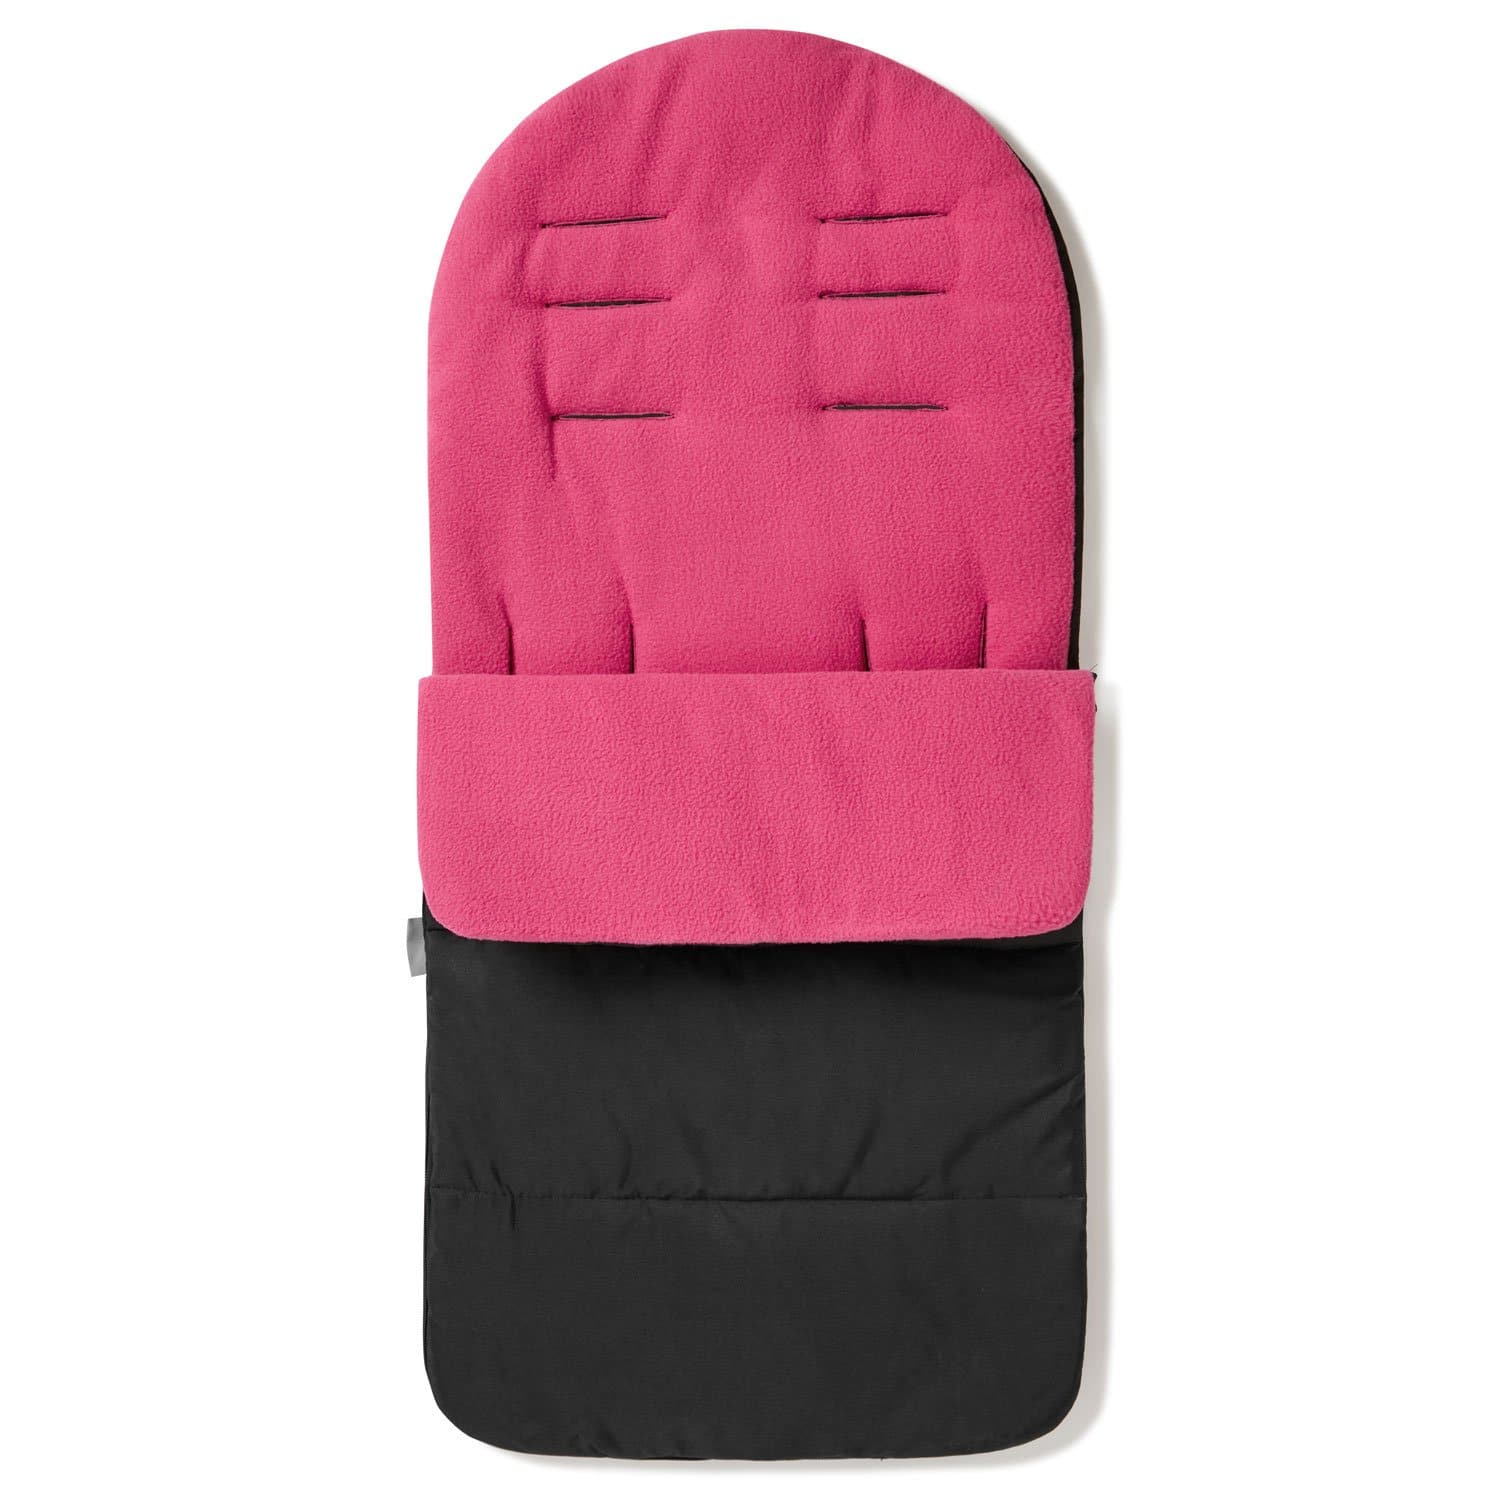 Universal Premium Pushchair Footmuff / Cosy Toes - Fits All Pushchairs / Prams And Buggies - Pink Rose / Fits All Models | For Your Little One